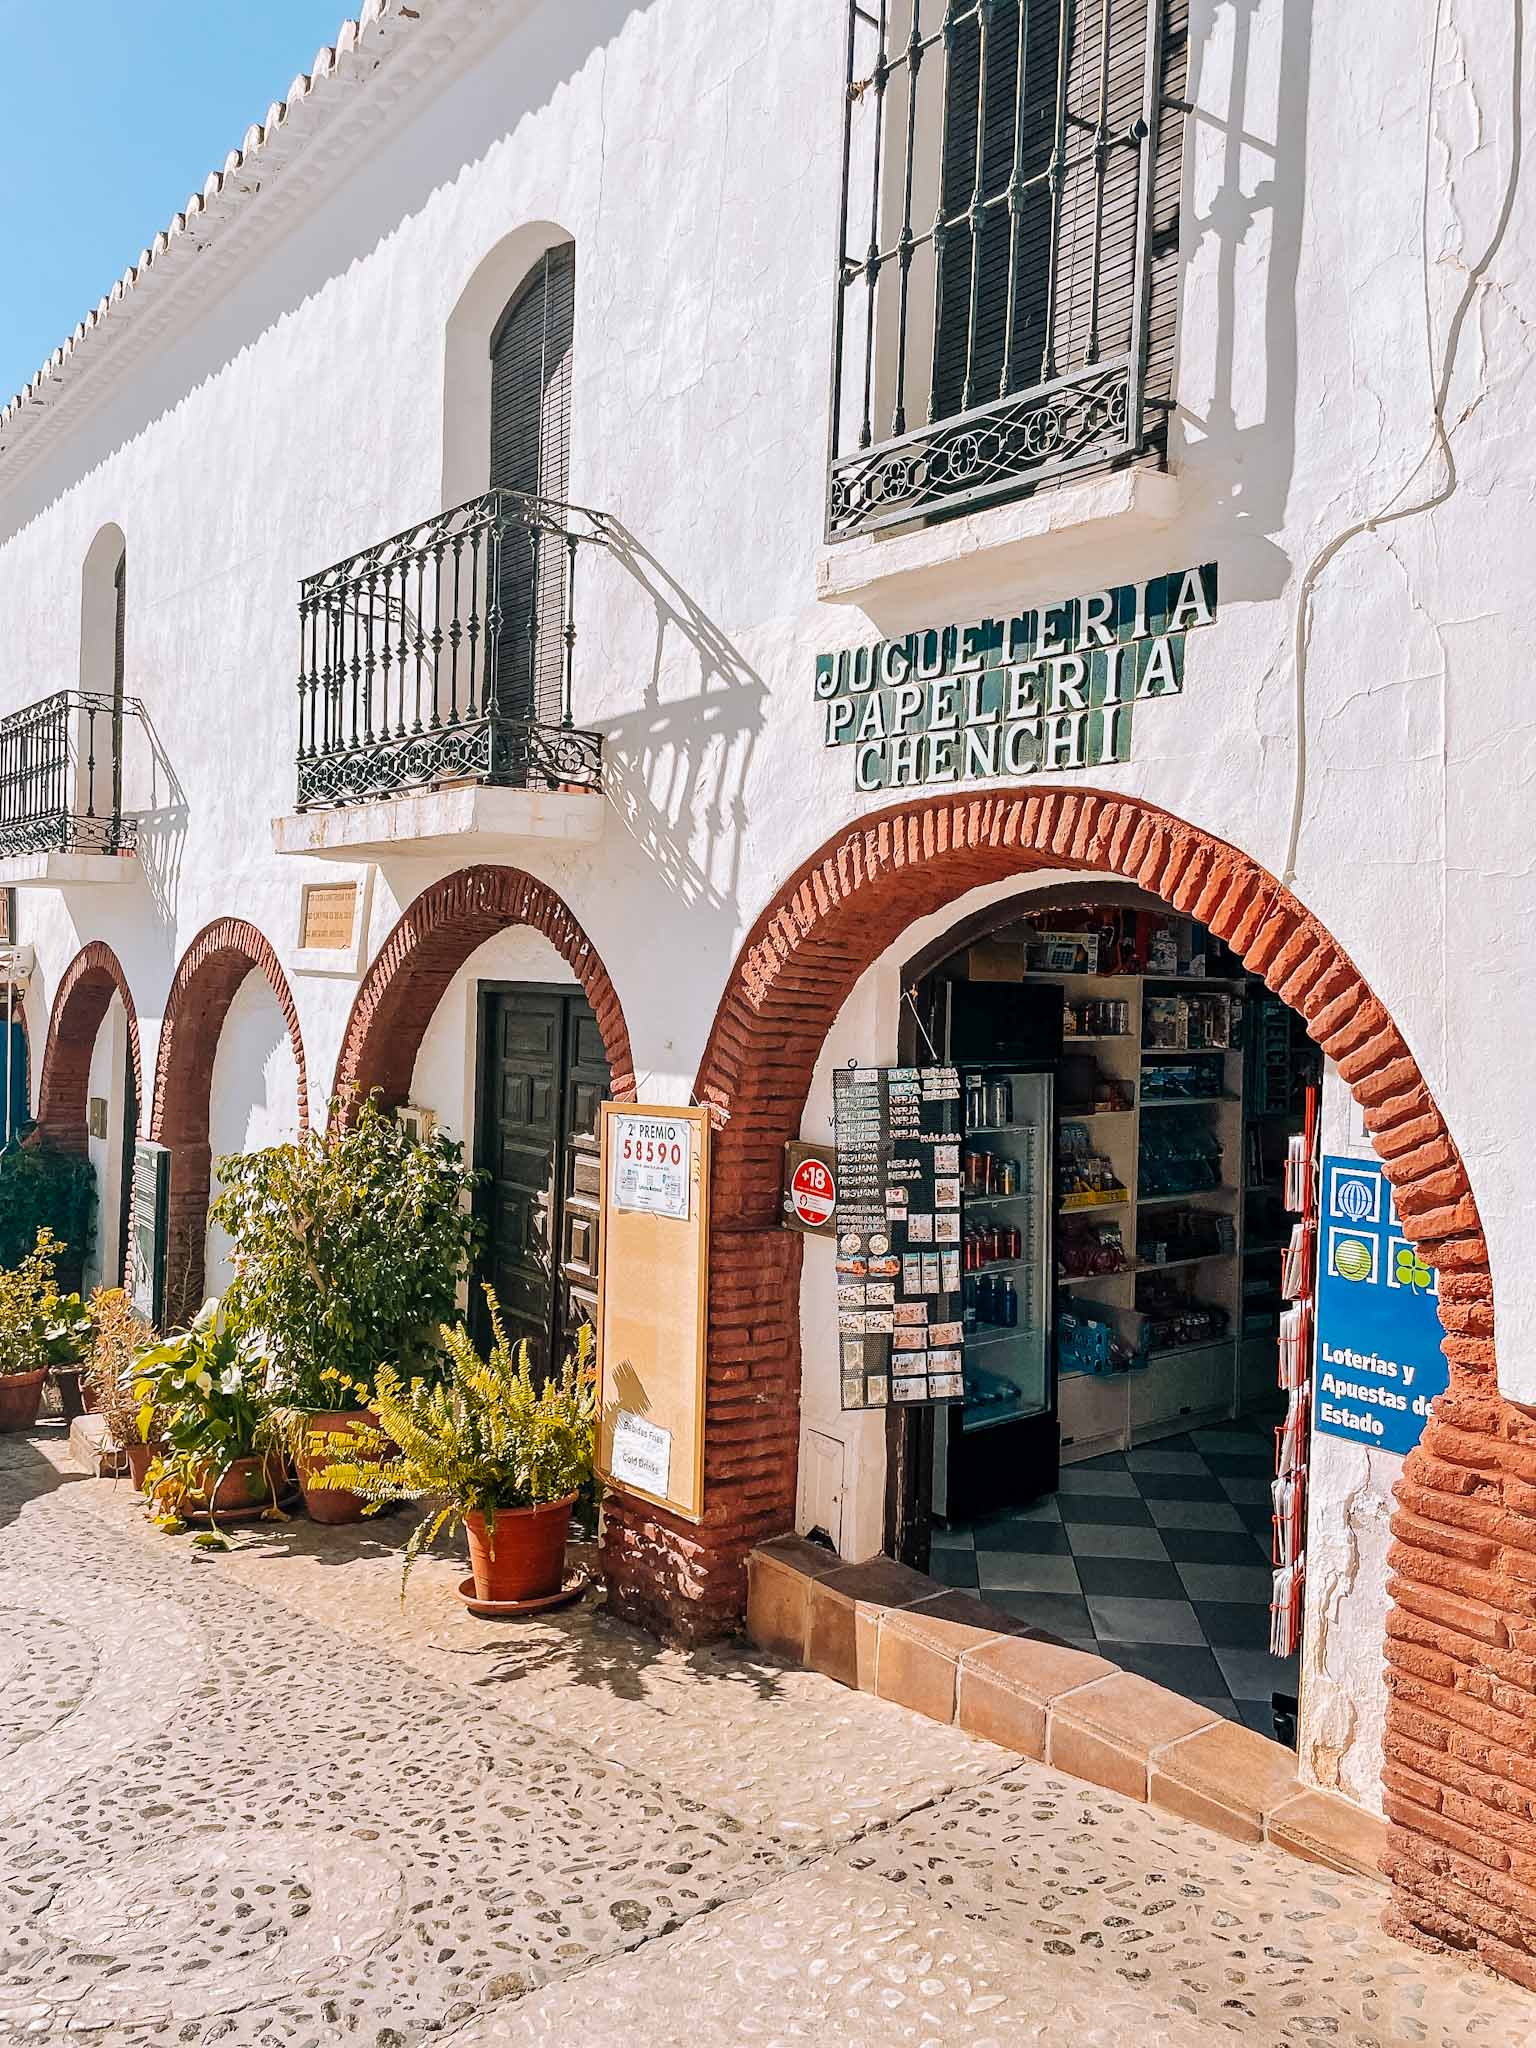 Best things to do and see in Frigiliana village, Spain